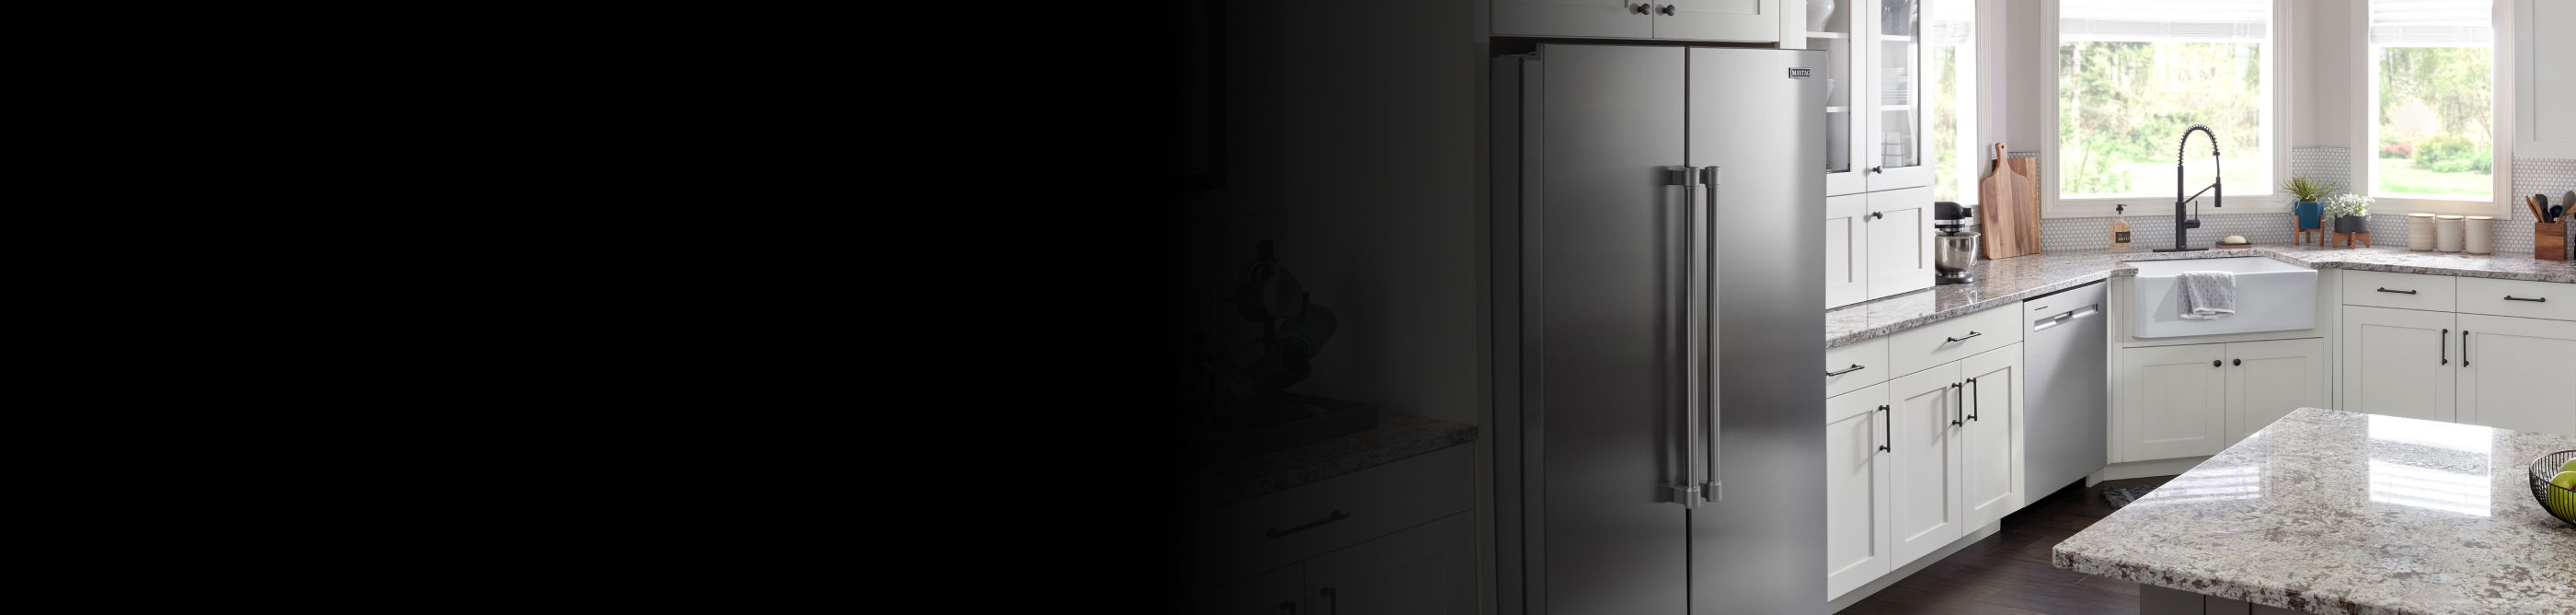 Stainless steel side-by-side refrigerator in white cabinetry 